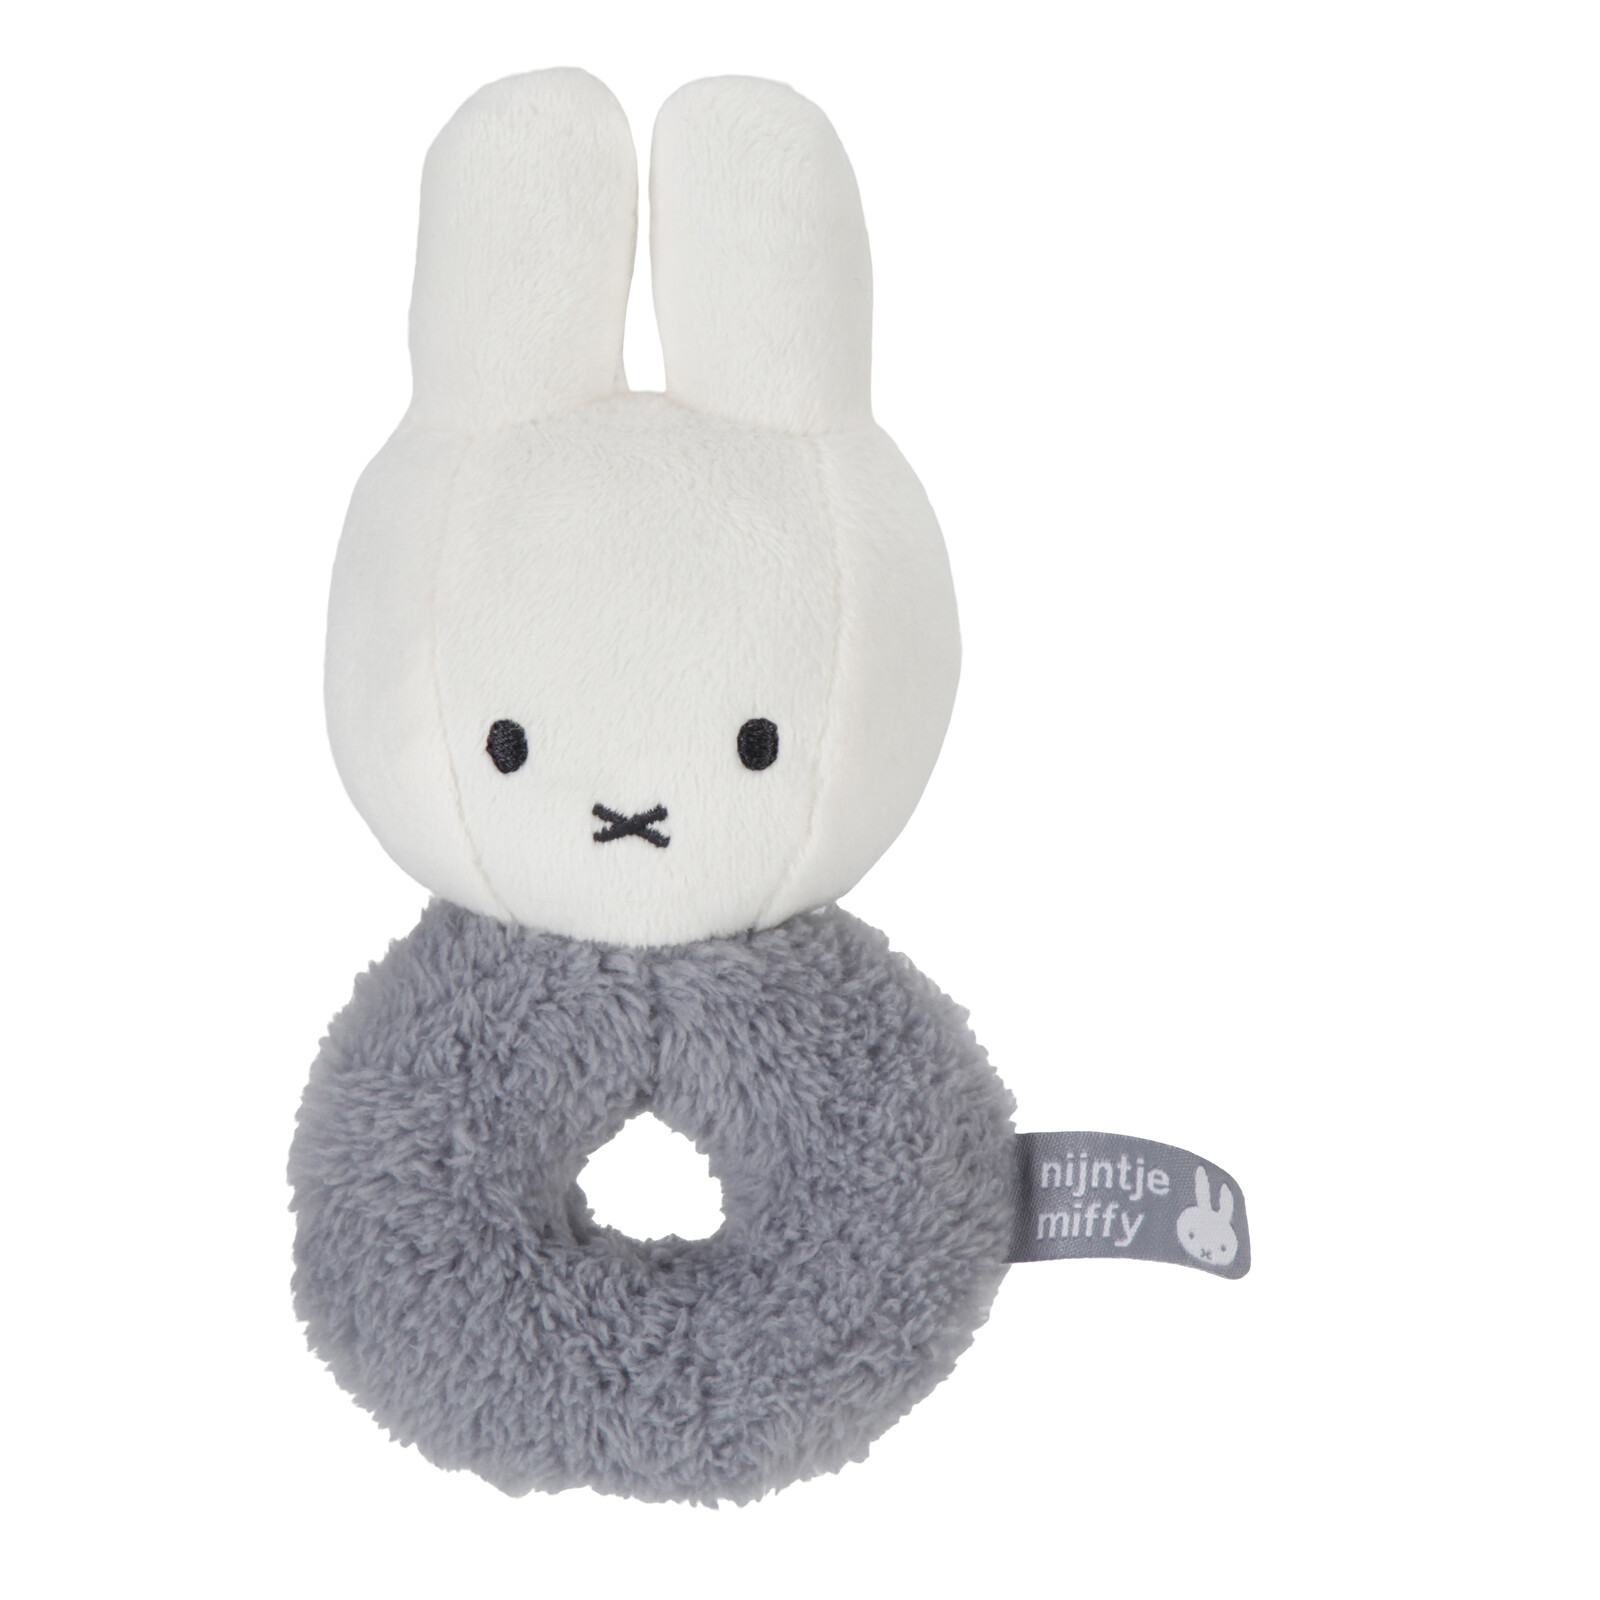 Miffy Rattle Fluffy blue